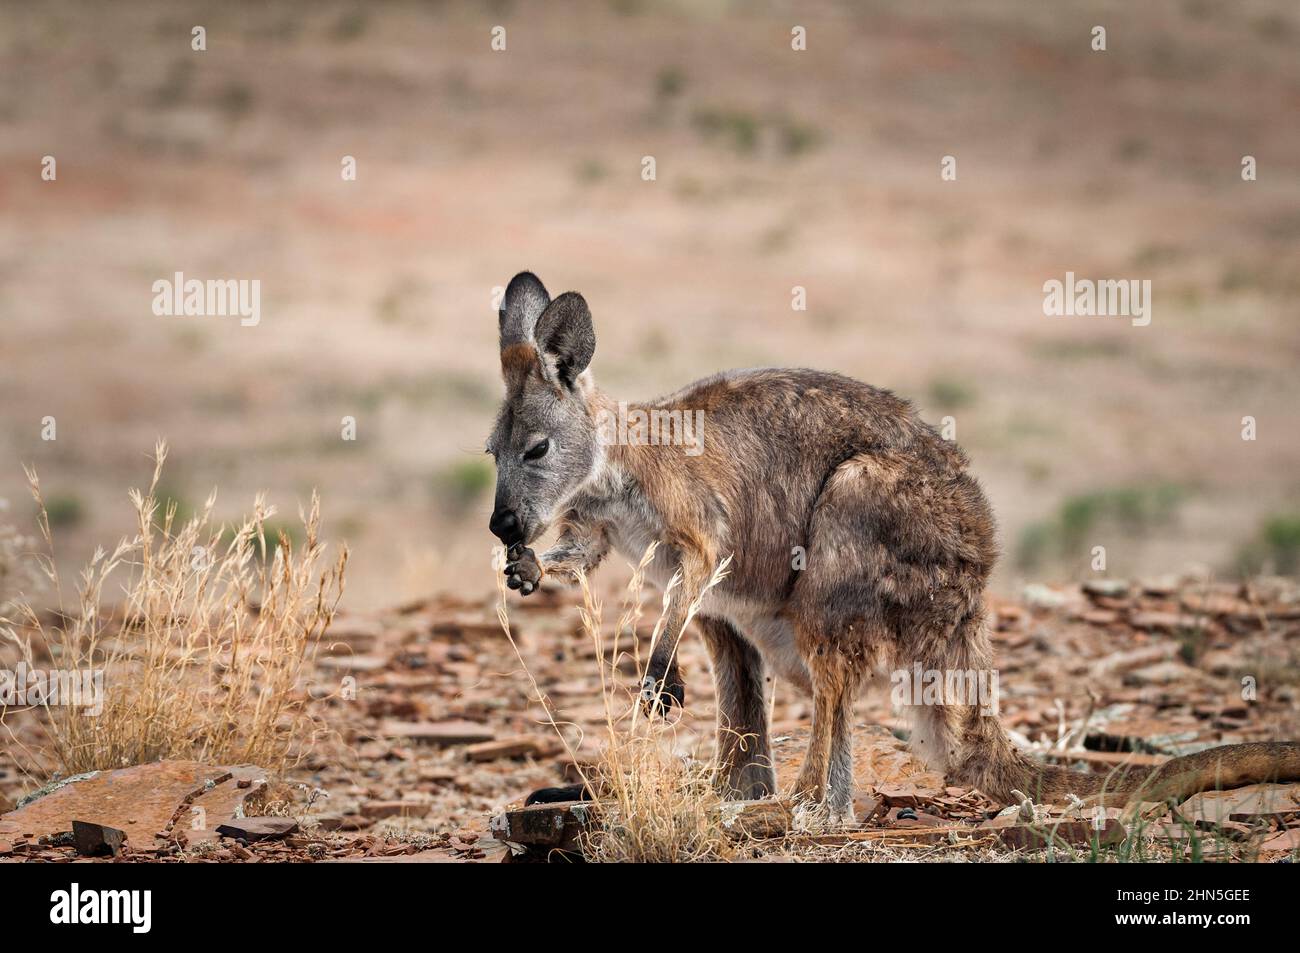 Euro Joey on a very hot summer day in the dry outback. Stock Photo